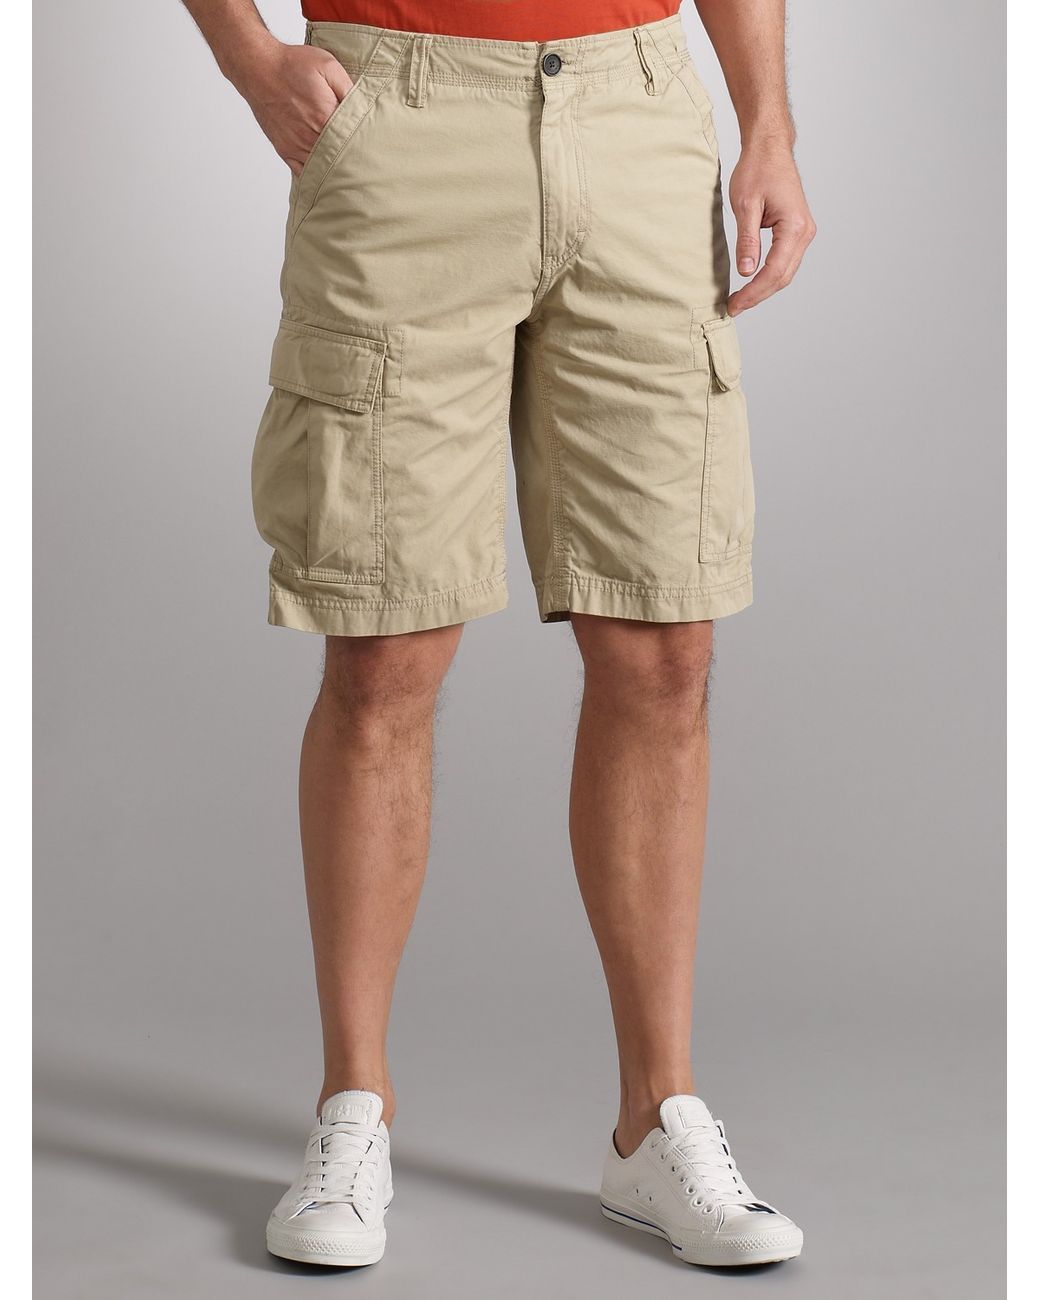 Timberland Eathkeepers Bridgeport Gd Cargo Shorts in Natural for Men | Lyst  UK